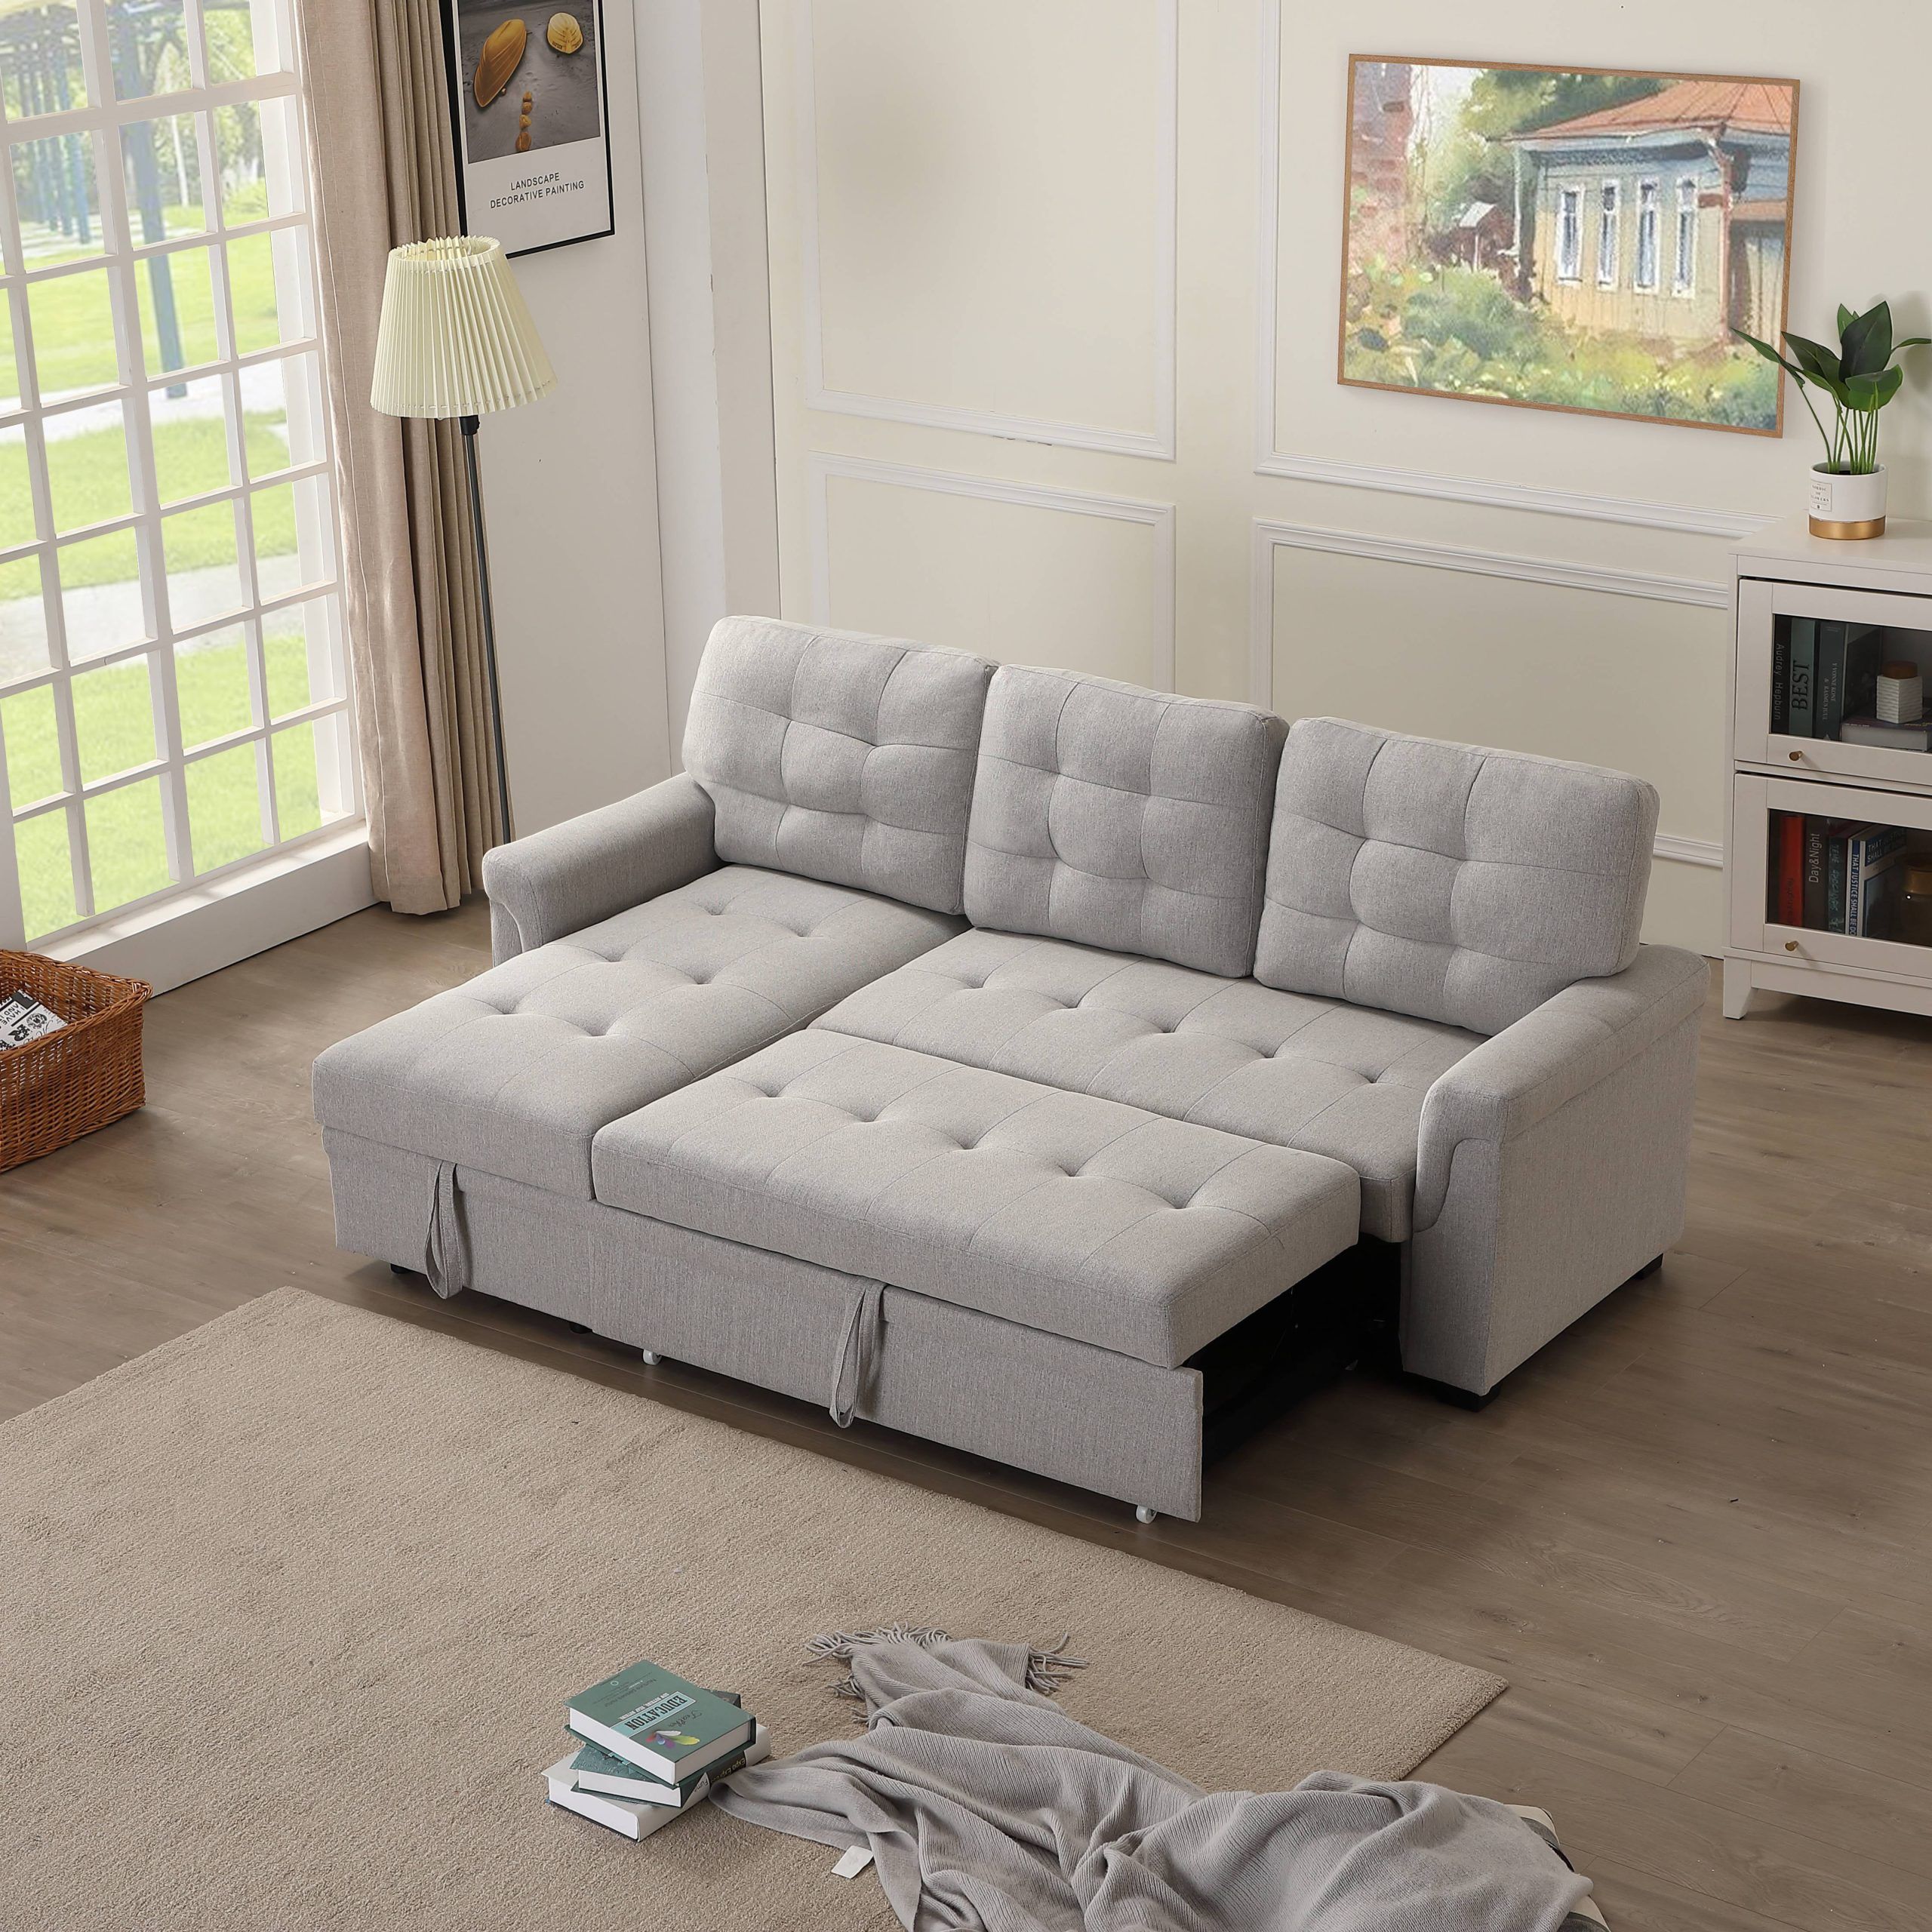 Clearance! 86"w L Shape Sectional Sofa With Reversible Chaise, Mid In L Shape Couches With Reversible Chaises (View 4 of 20)